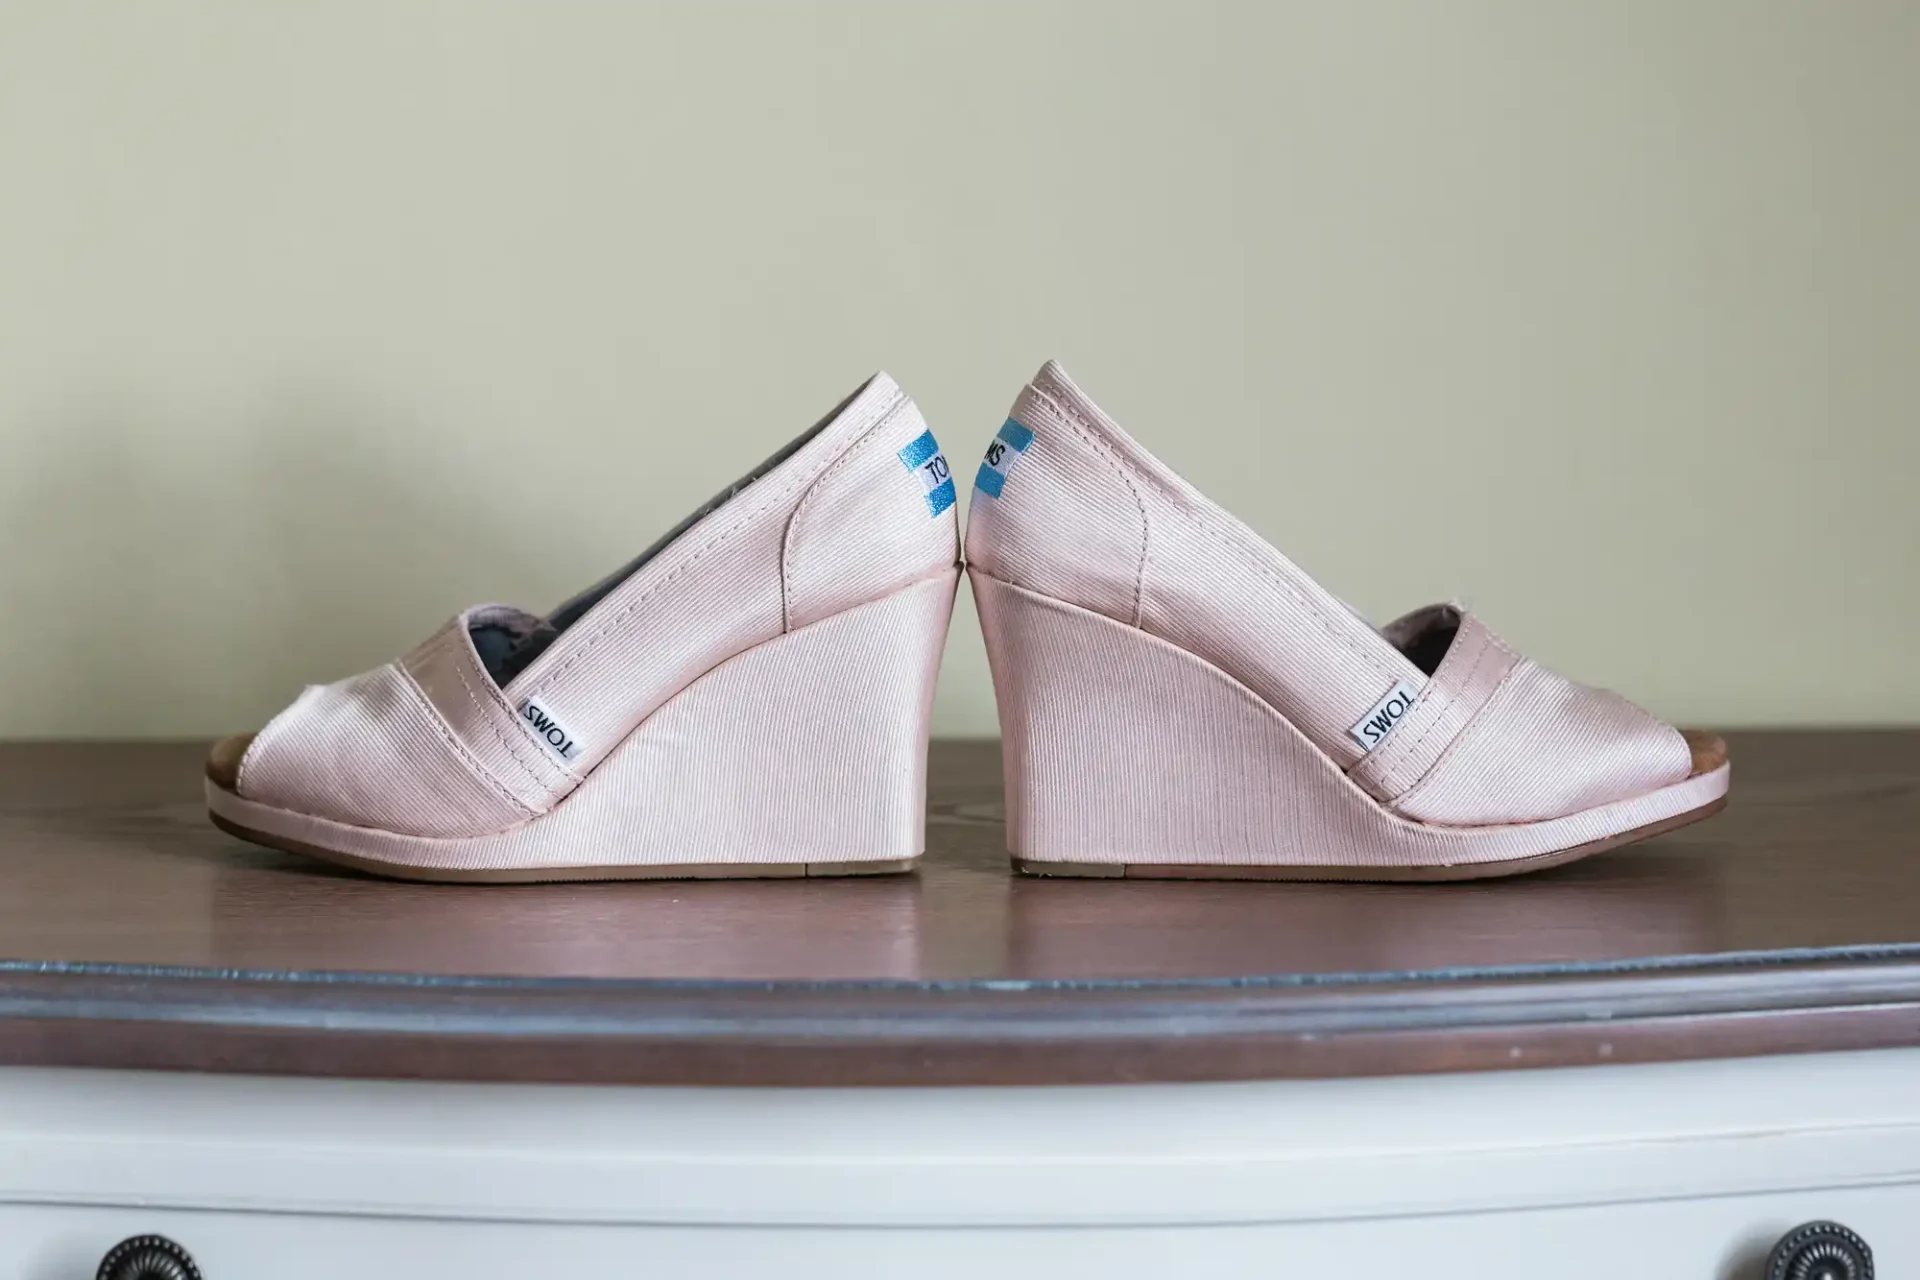 A pair of beige wedge heel shoes with "toms" labels, displayed on a wooden surface against a green wall.